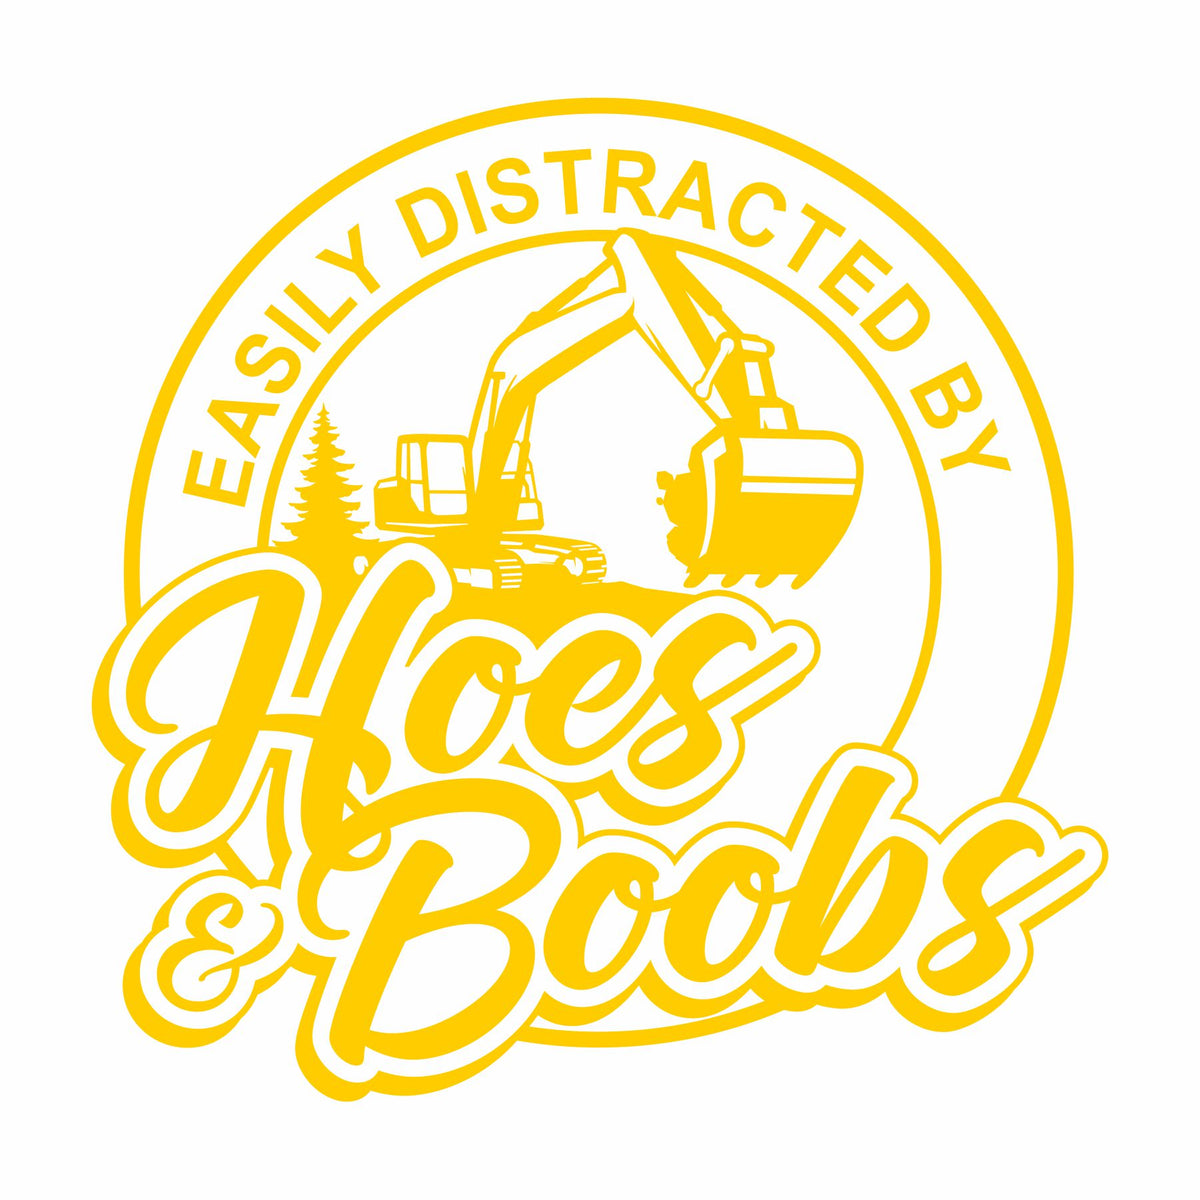 Easily Distracted by Hoes & Boobs - Excavator - Vinyl Decal - Free Shipping